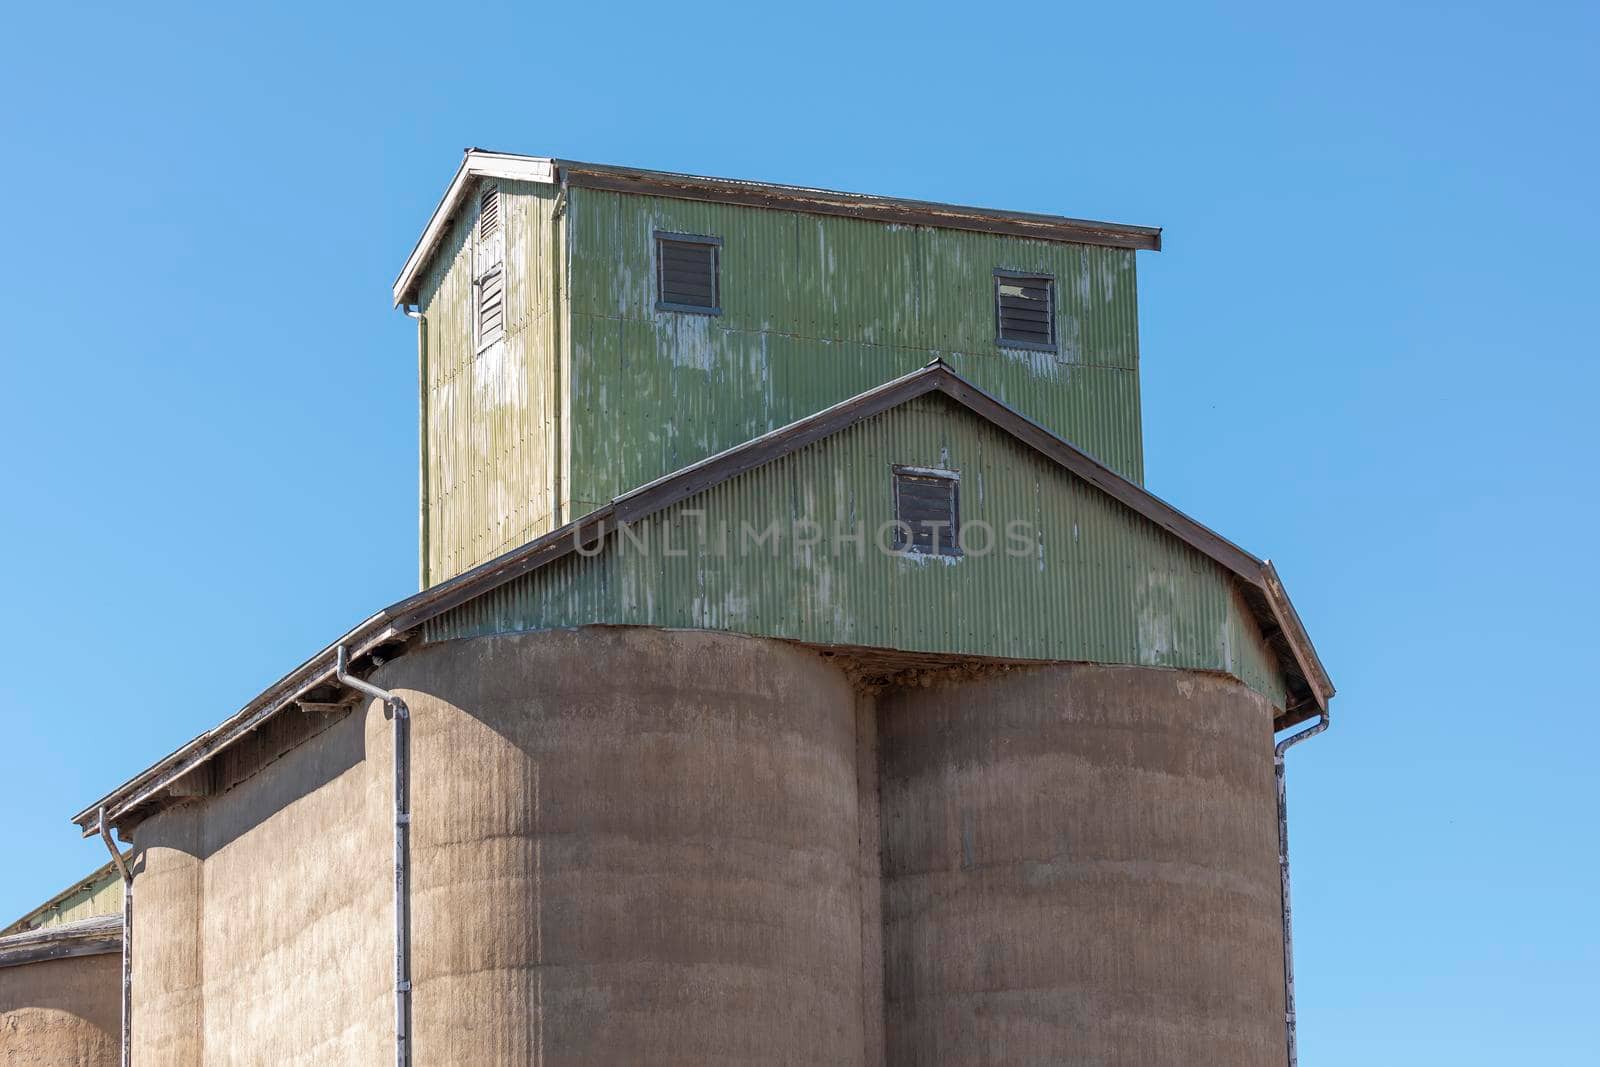 An old green corrugated iron building on the top of a concrete storage silo at a flour mill